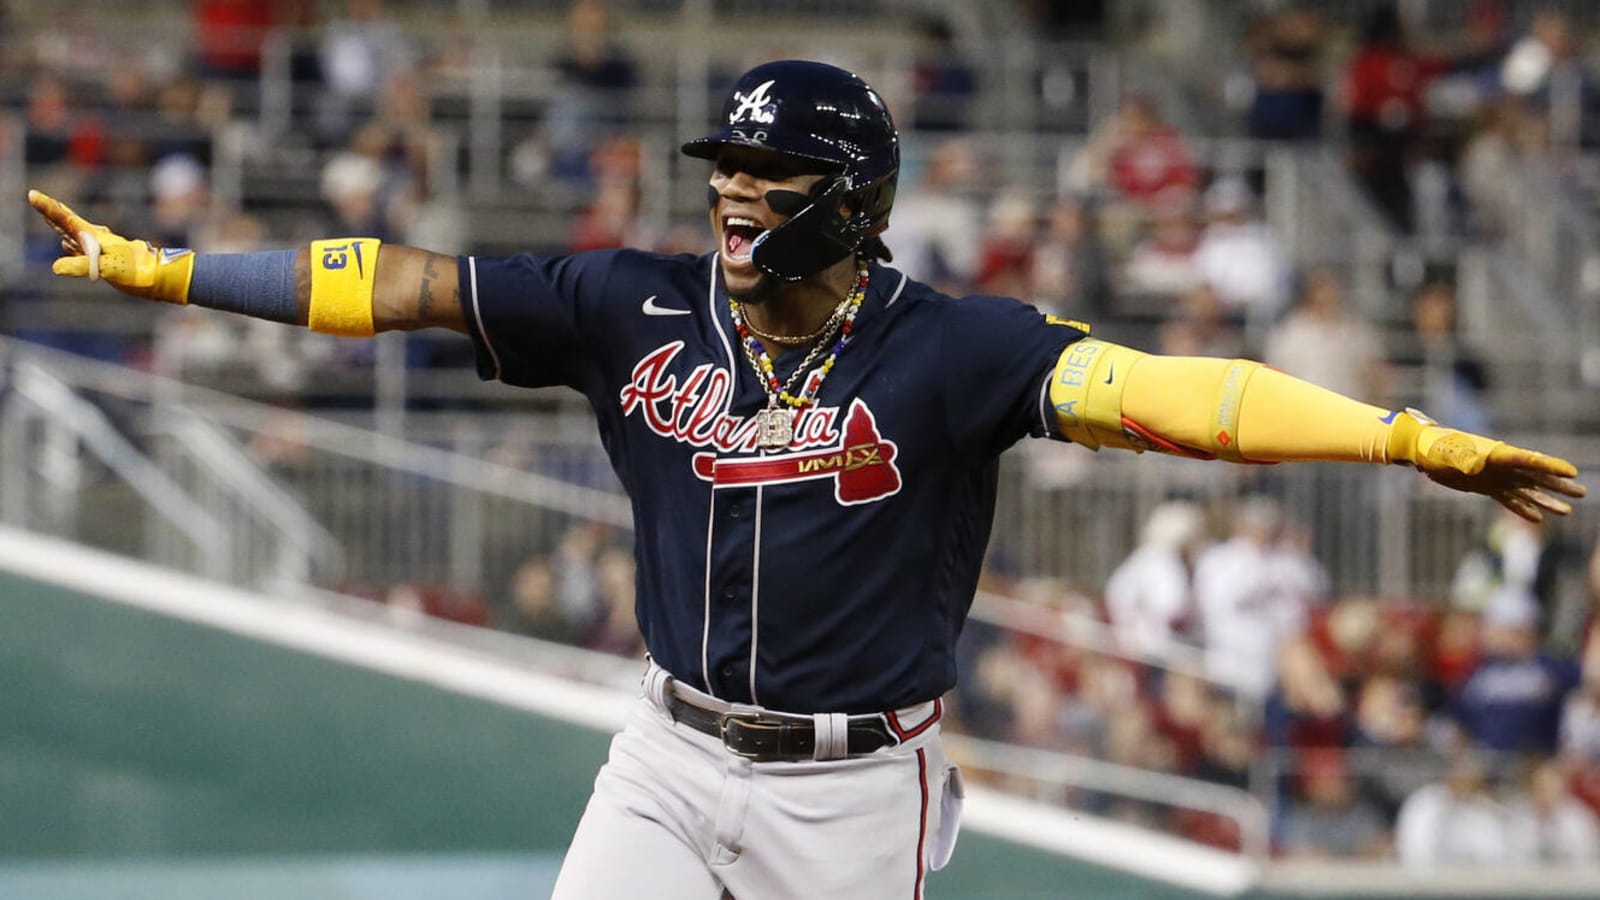 Ronald Acuna Jr. hits leadoff HR to join exclusive 40/40 club